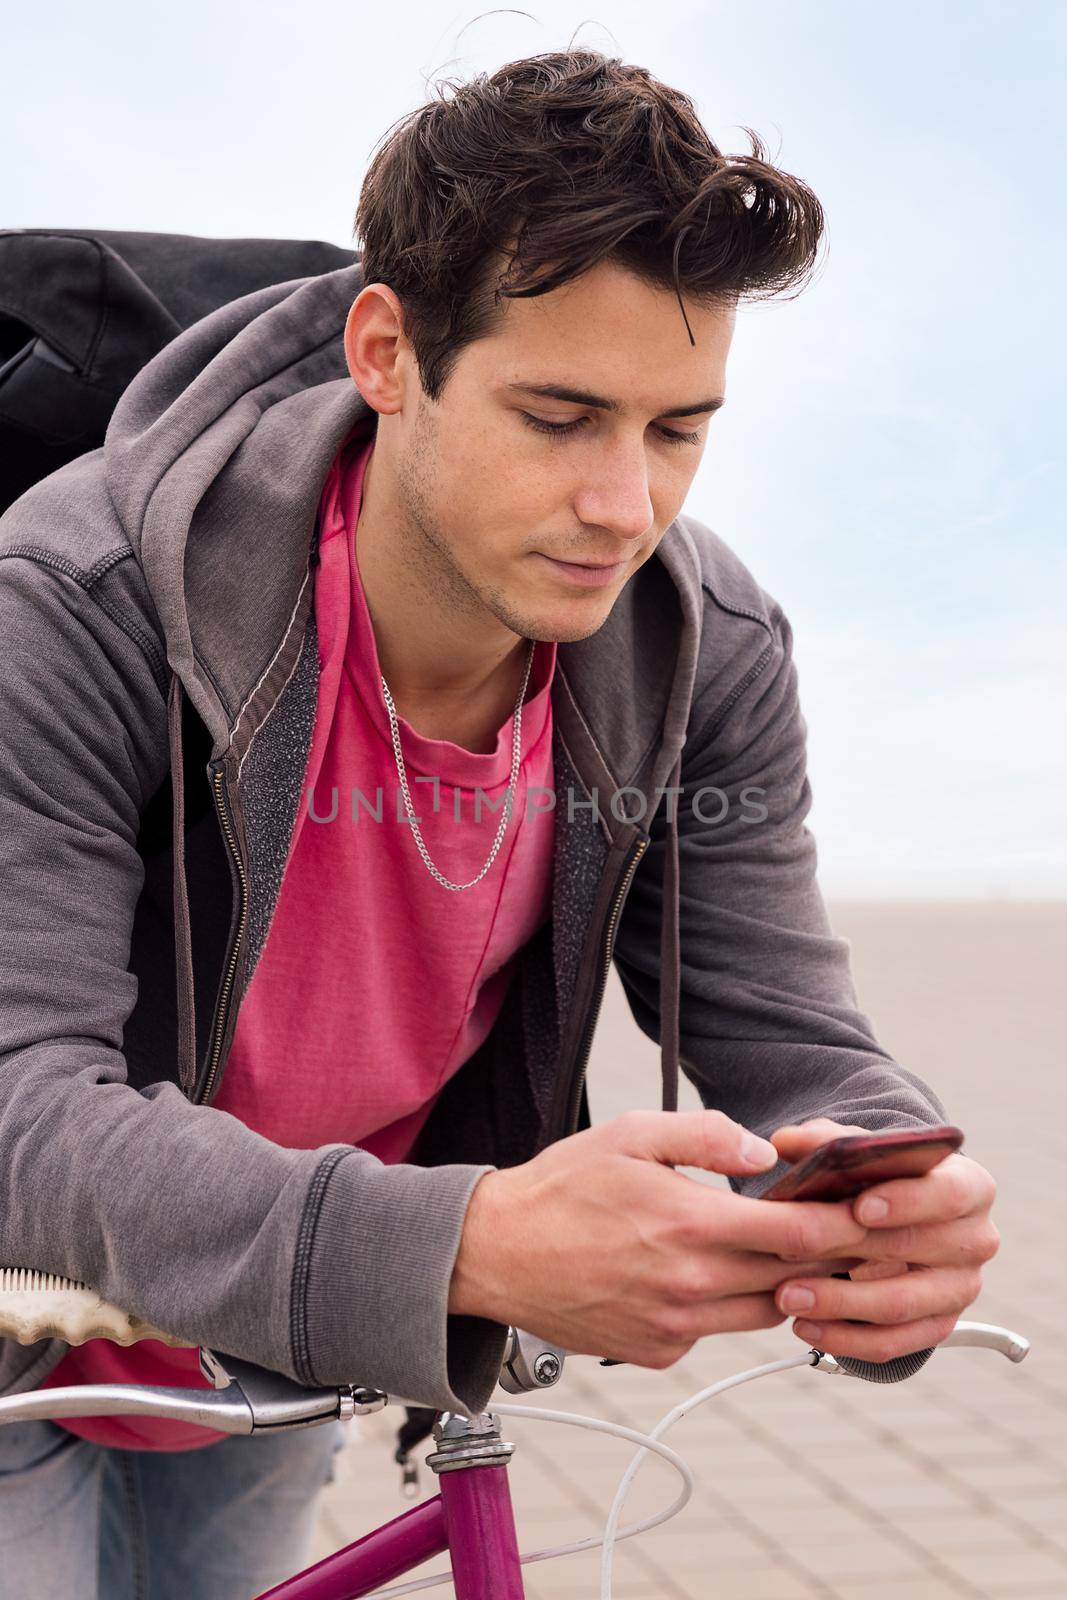 vertical photo of a handsome young man leaning on a bike using a mobile phone, concept of communication and ecological urban transportation